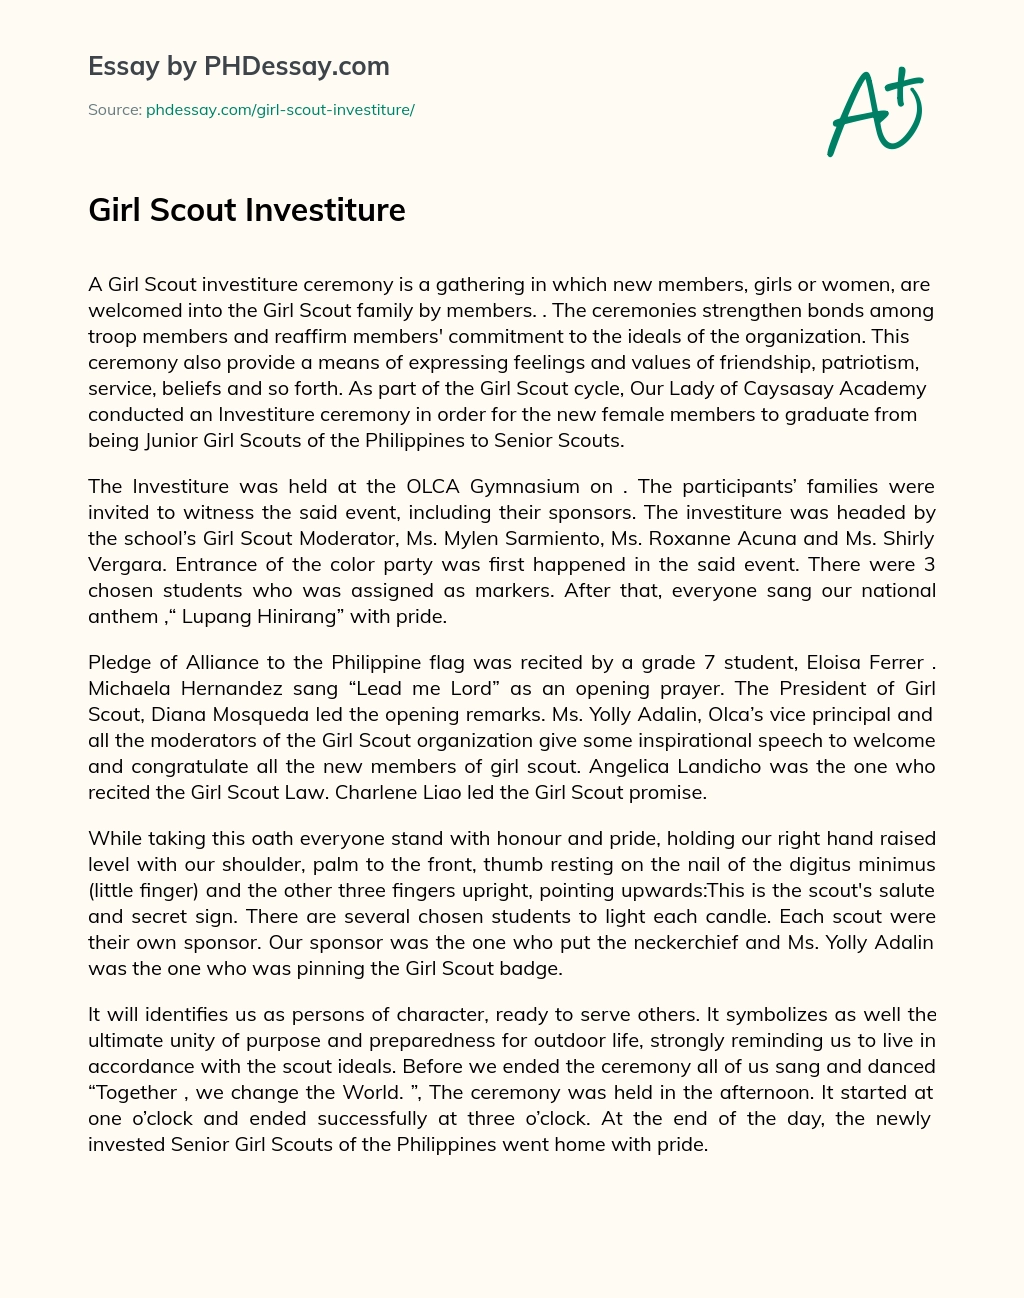 Girl Scout Investiture essay